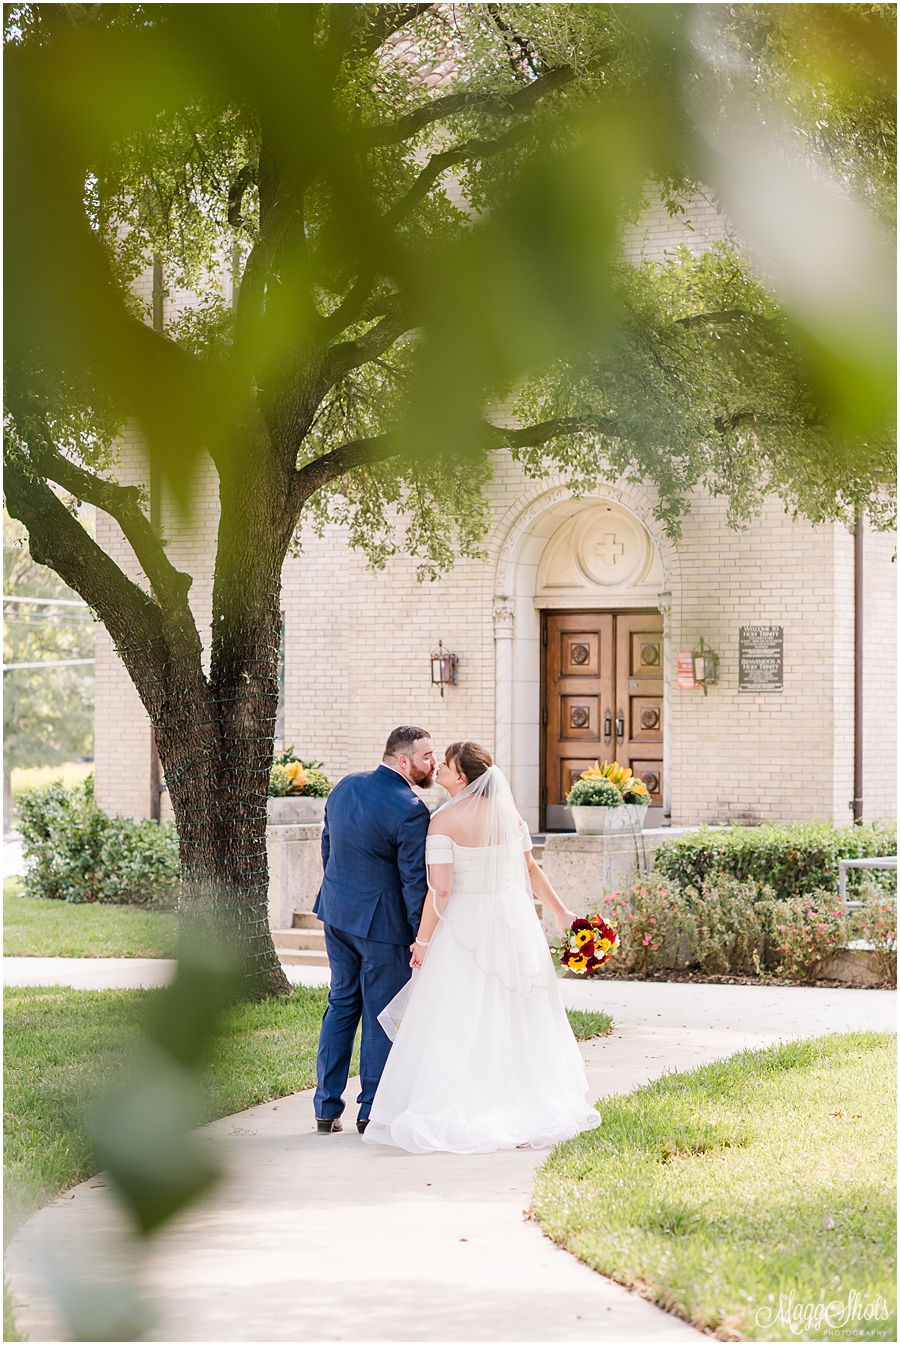 MaggShots Photography, DFW Wedding Photographer, Belo Mansion, Wedding Photographer, Belo Mansion, Wedding Photographer, Dallas wedding, Belo Mansion Wedding, Trinity Groves Engagement, Klyde Warren Park Engagement, Trinity Groves Photographyer, bride and groom, just married, romantics